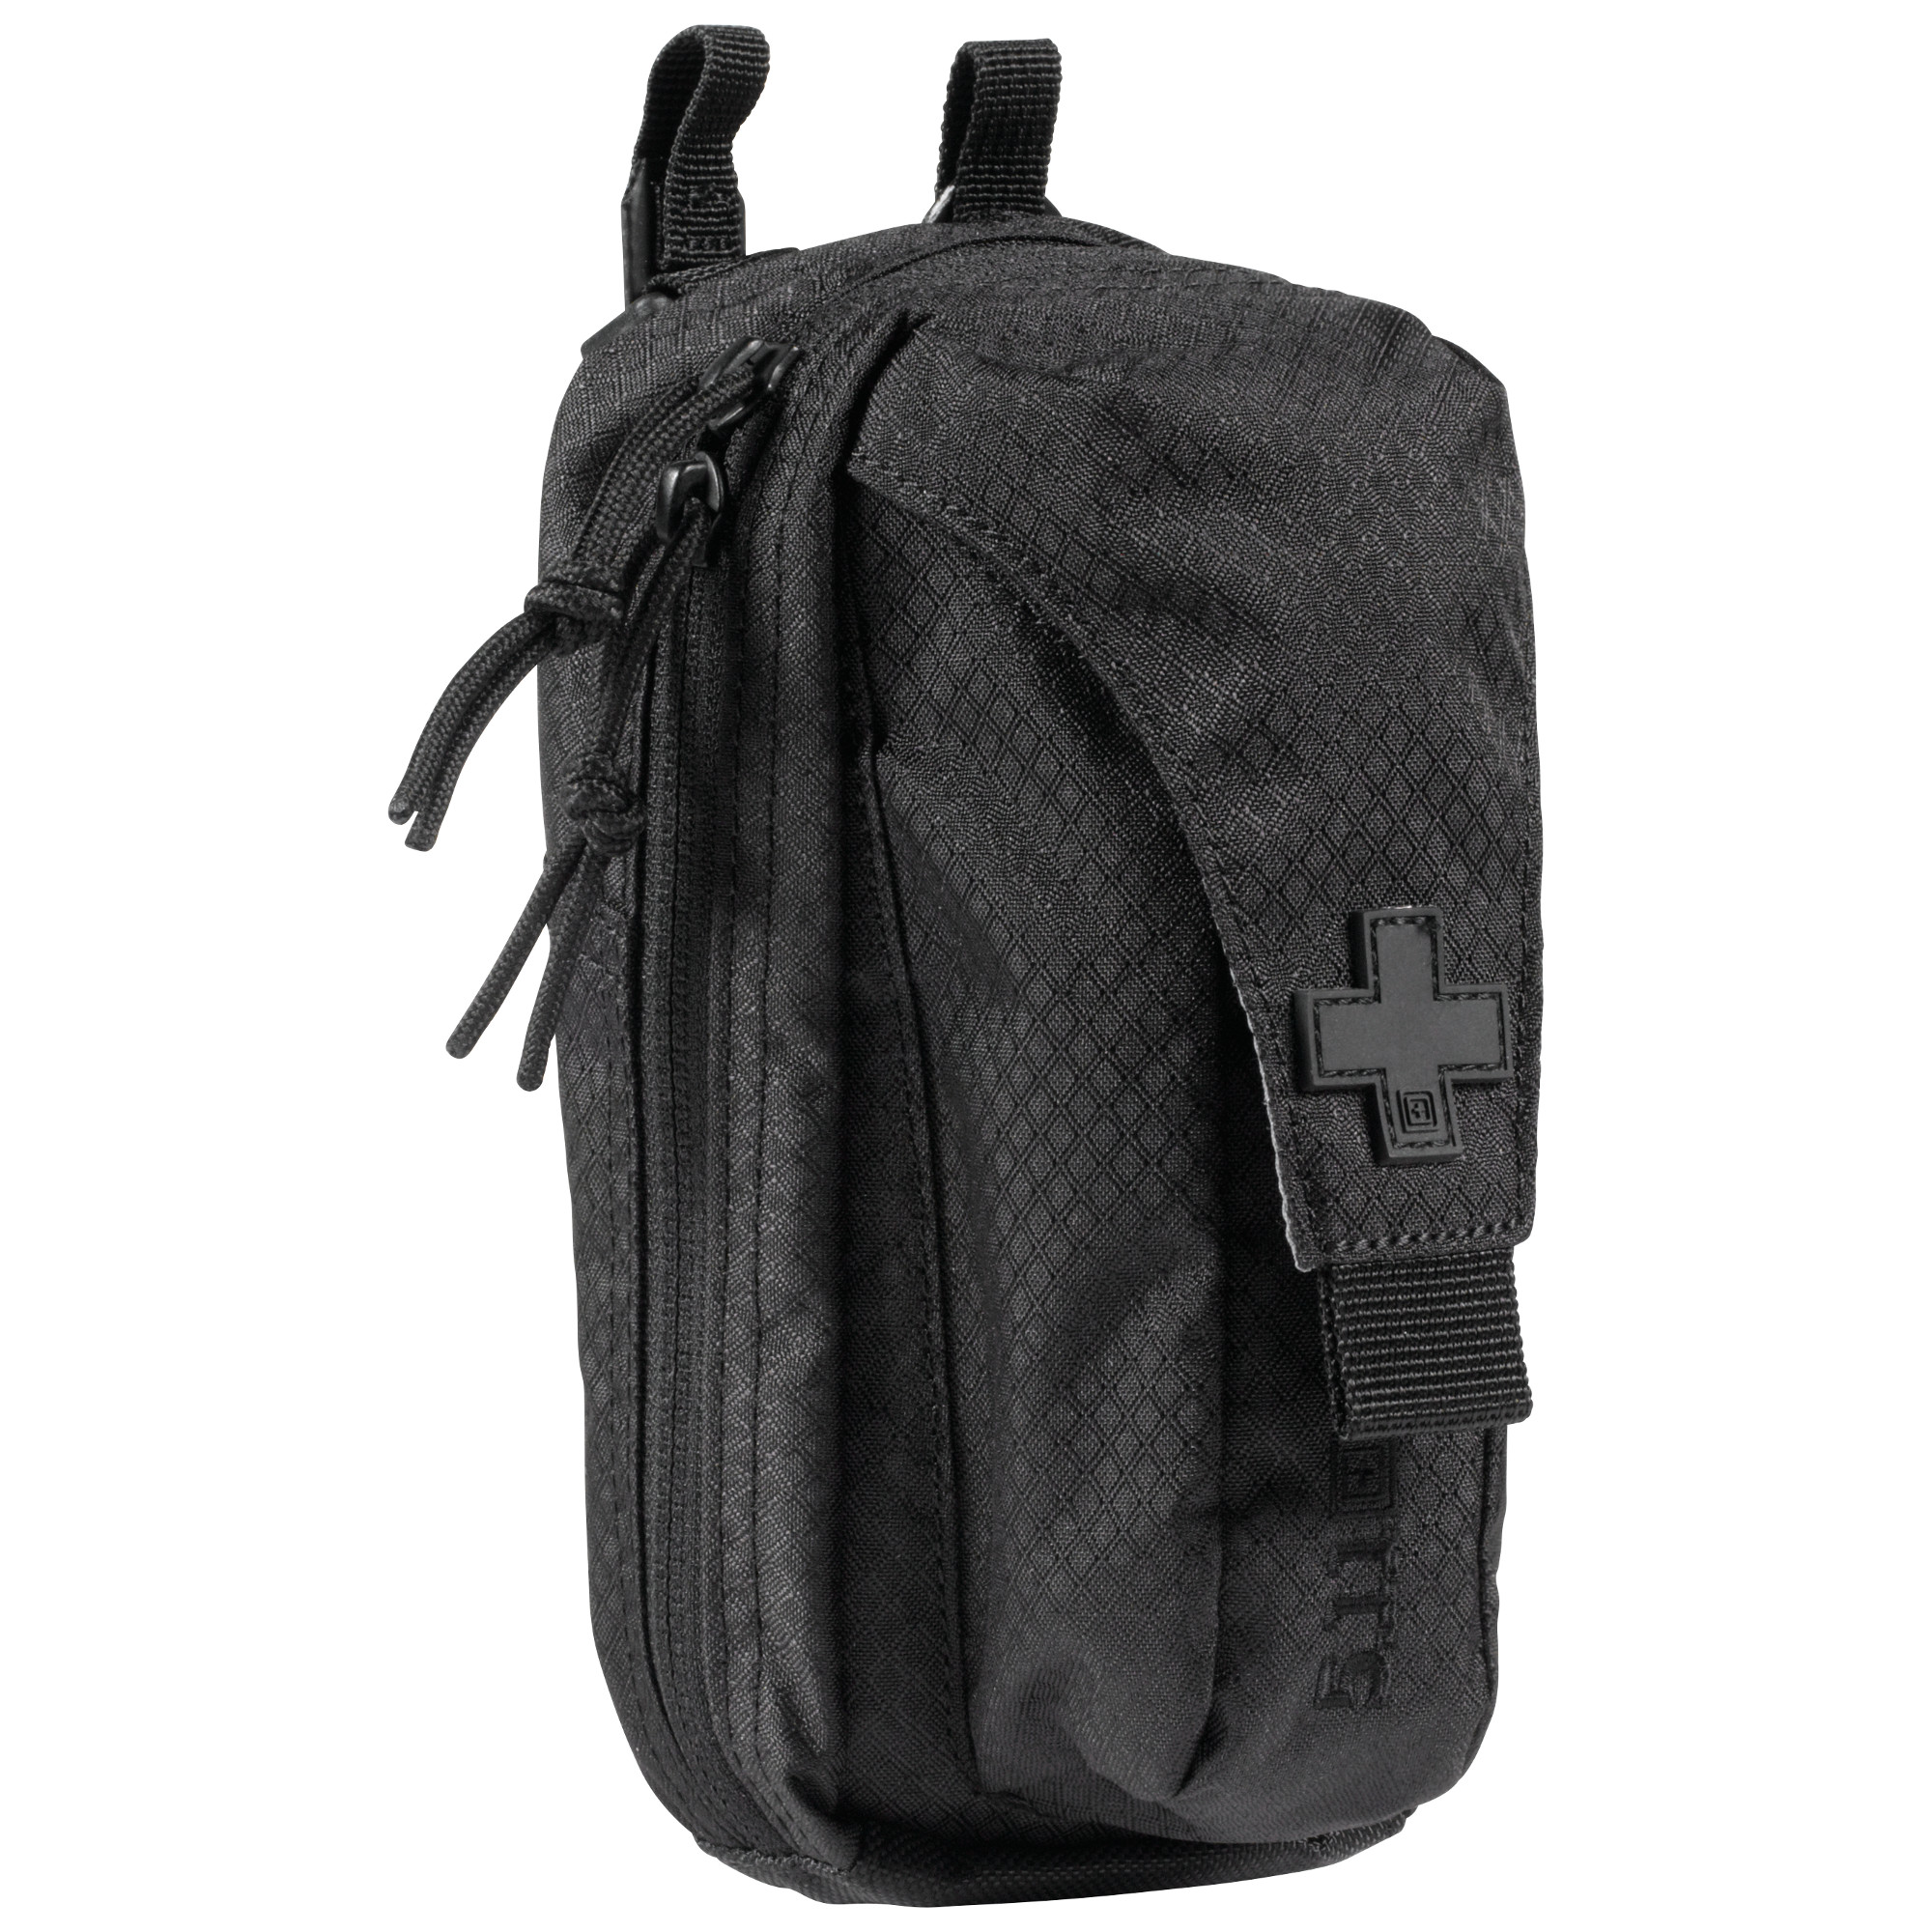 Pouzdro 5.11 Ignitor Med Pouch - BLACK #019